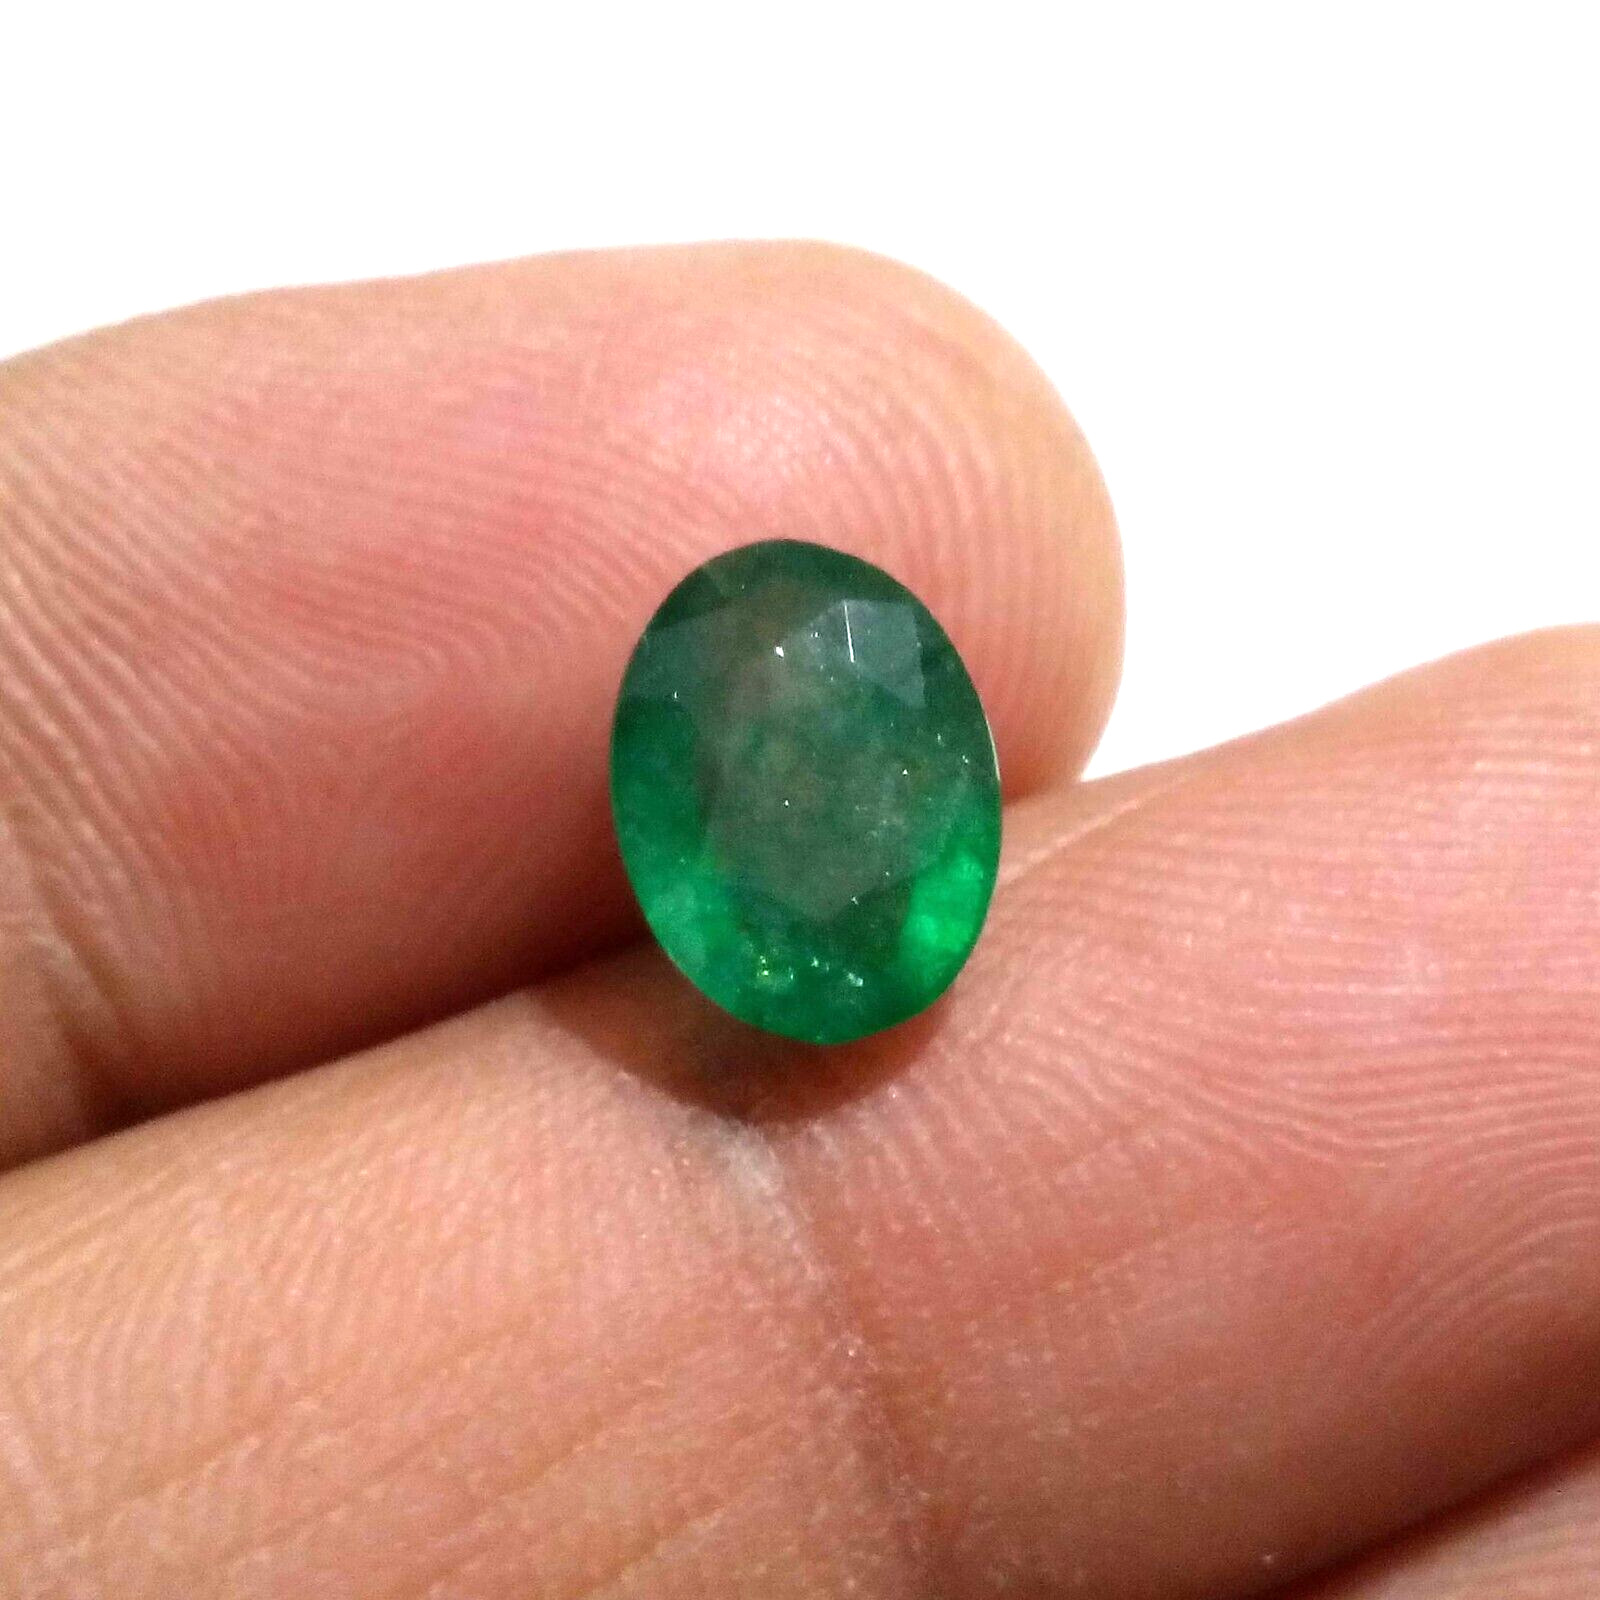 Attractive Zambian Emerald Faceted Oval Shape 2.70 Crt Emerald Loose Gemstone